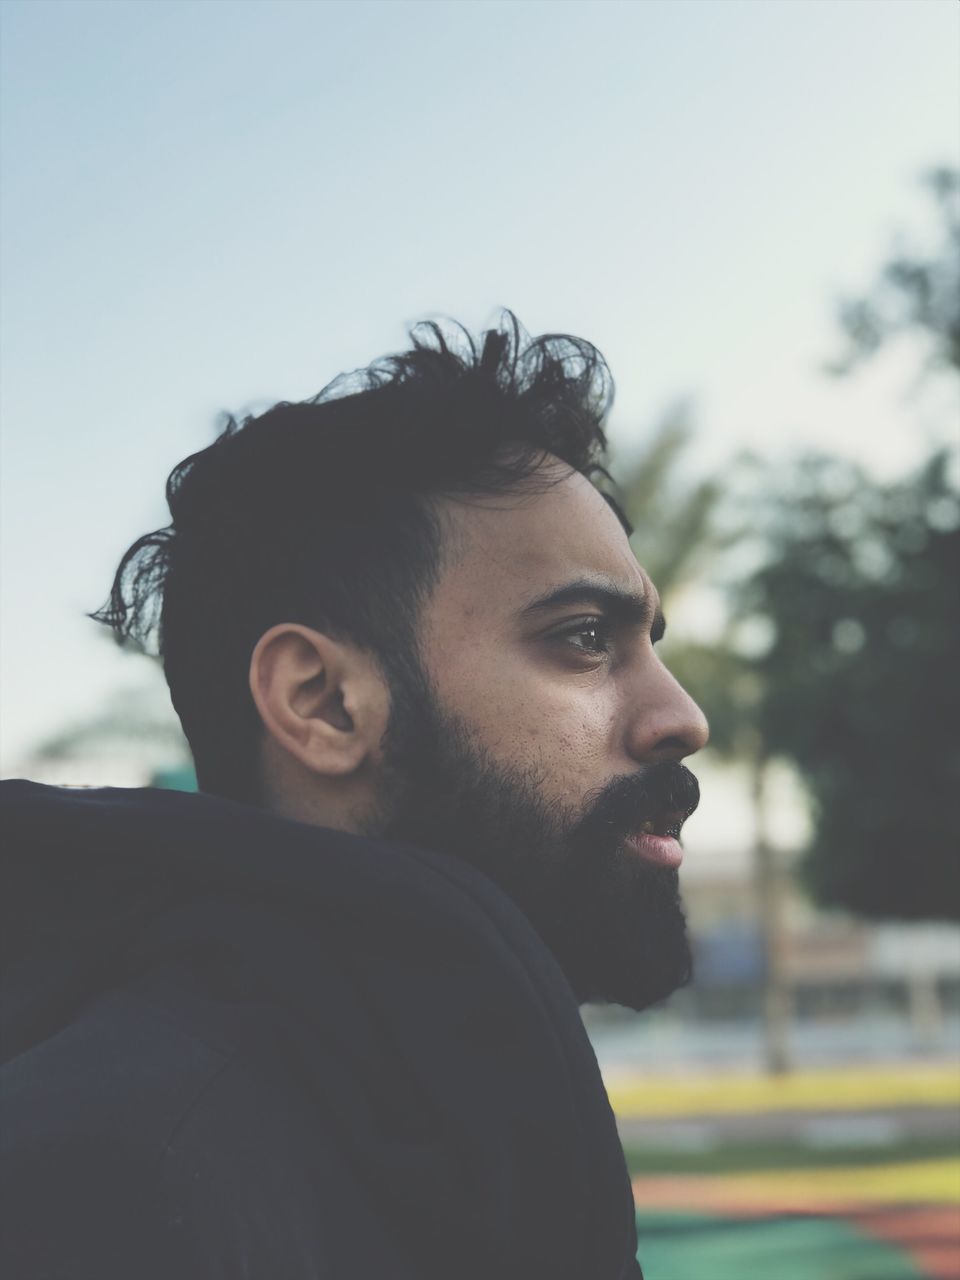 beard, portrait, young men, headshot, real people, one person, young adult, facial hair, looking away, lifestyles, leisure activity, sky, looking, focus on foreground, side view, day, casual clothing, contemplation, outdoors, profile view, hairstyle